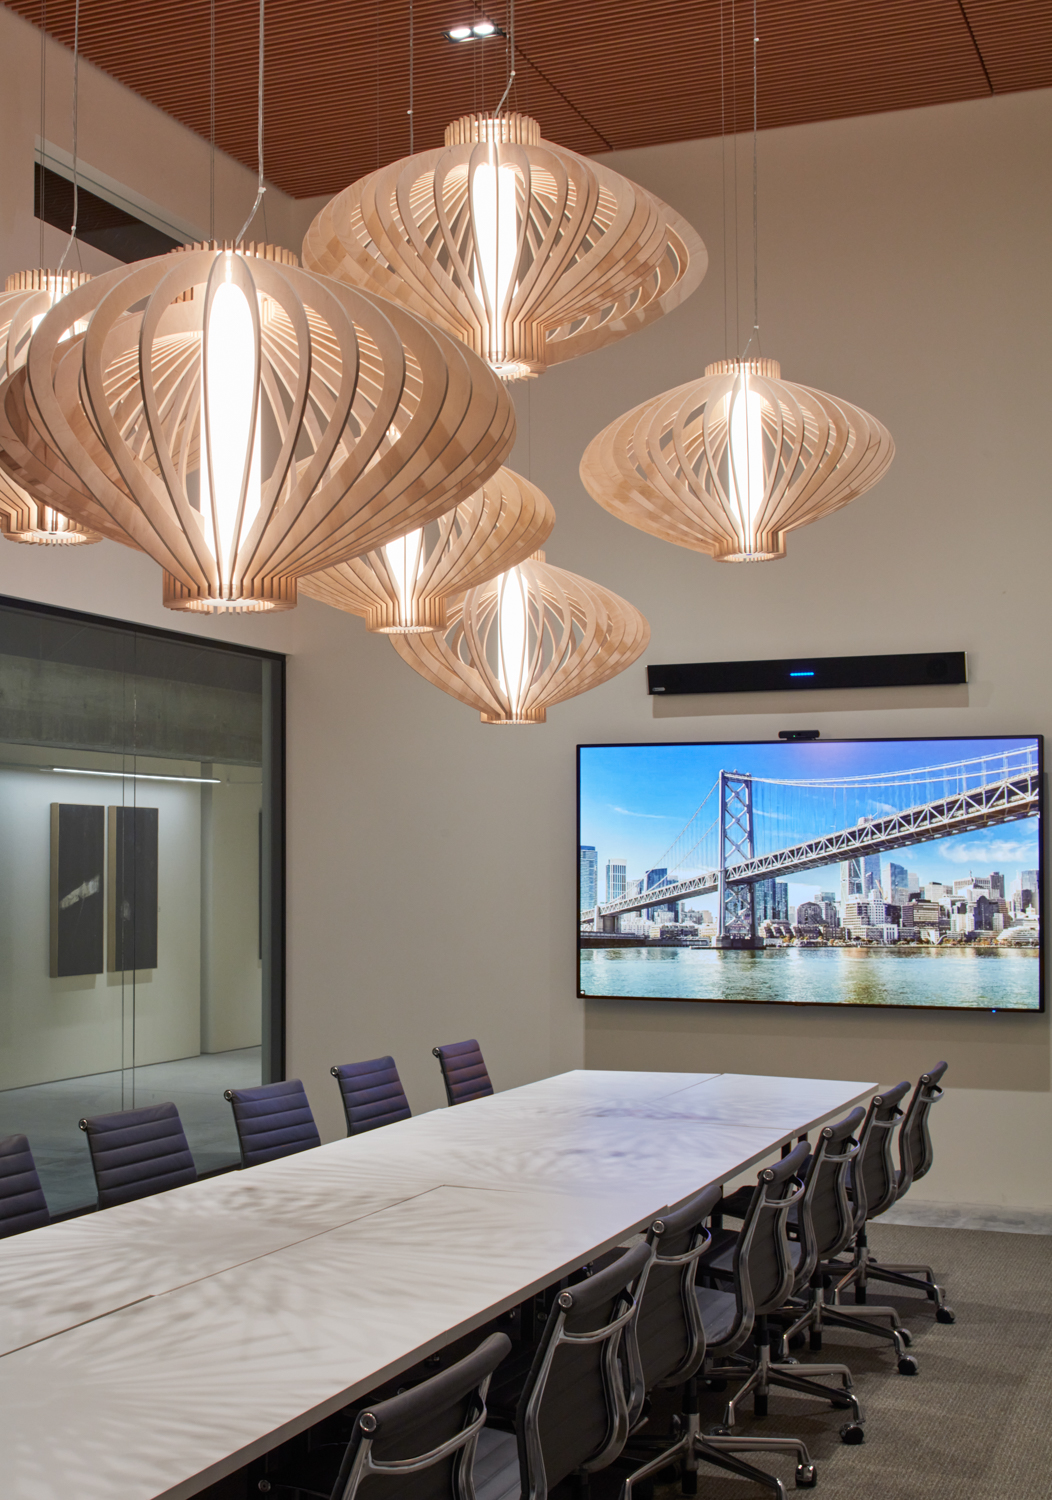 Center for Architecture and Design meeting room, image by Richard Barnes